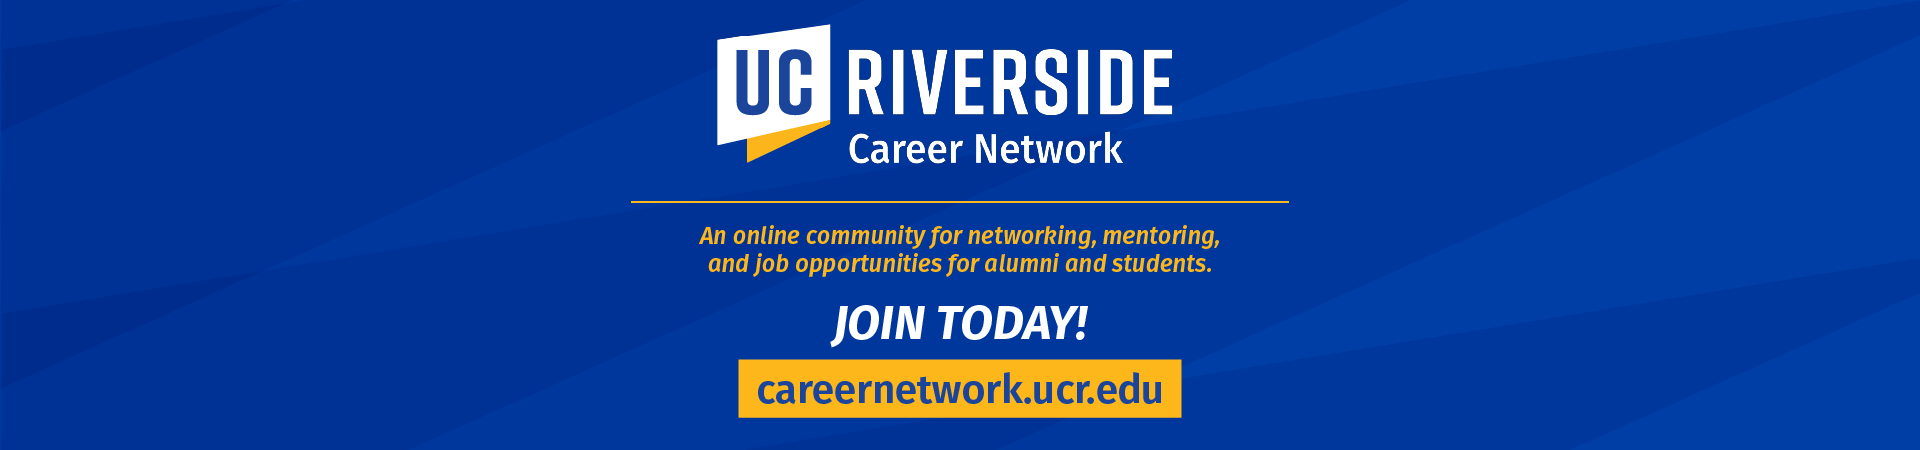 UCR Career Network: An online community for networking, mentoring,and job opportunities for alumni and students.